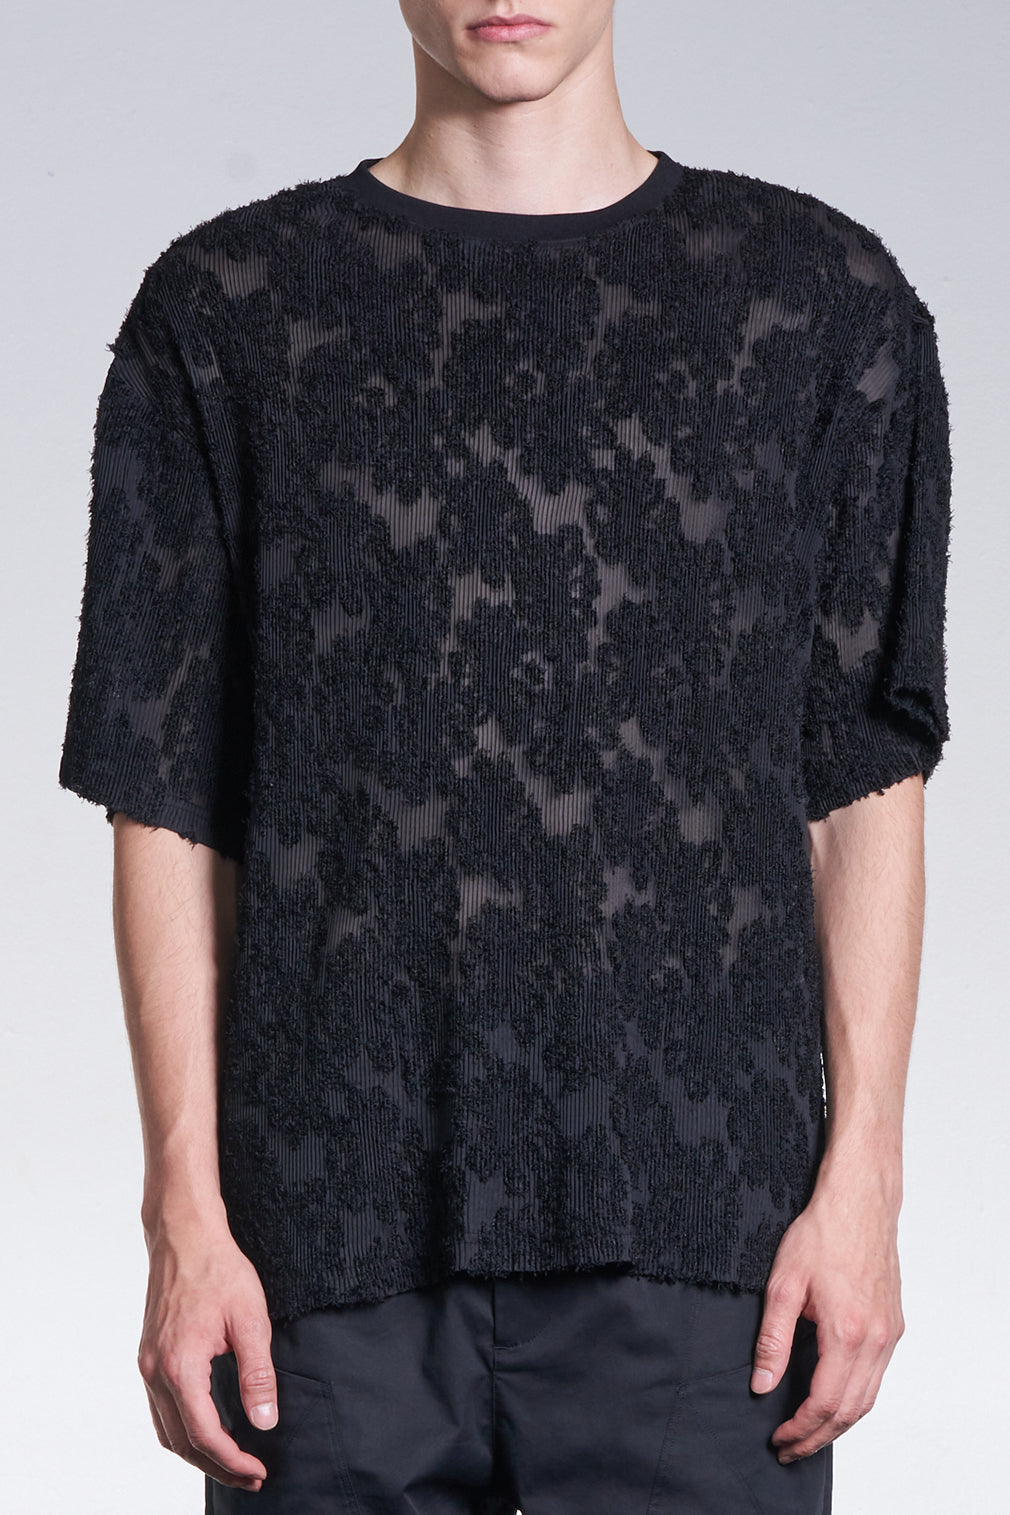 Burnt Out Flower Pattern Pleated Tee